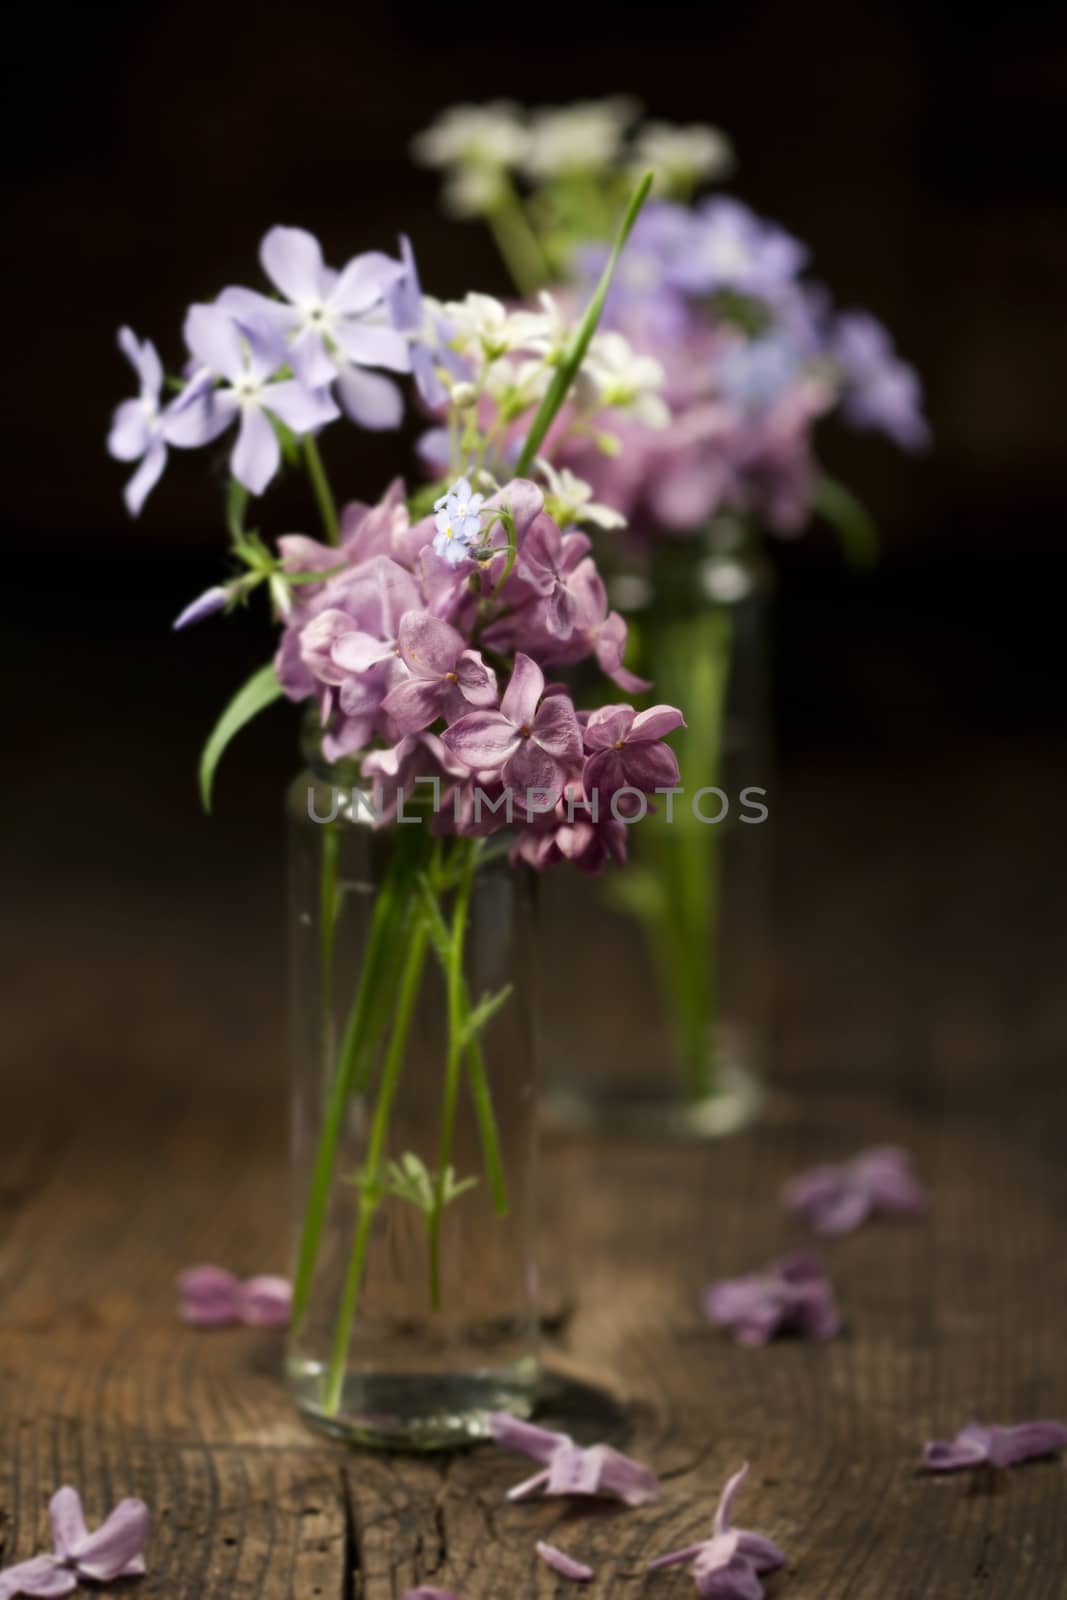 Beautiful spring flowers in a vase on wooden background